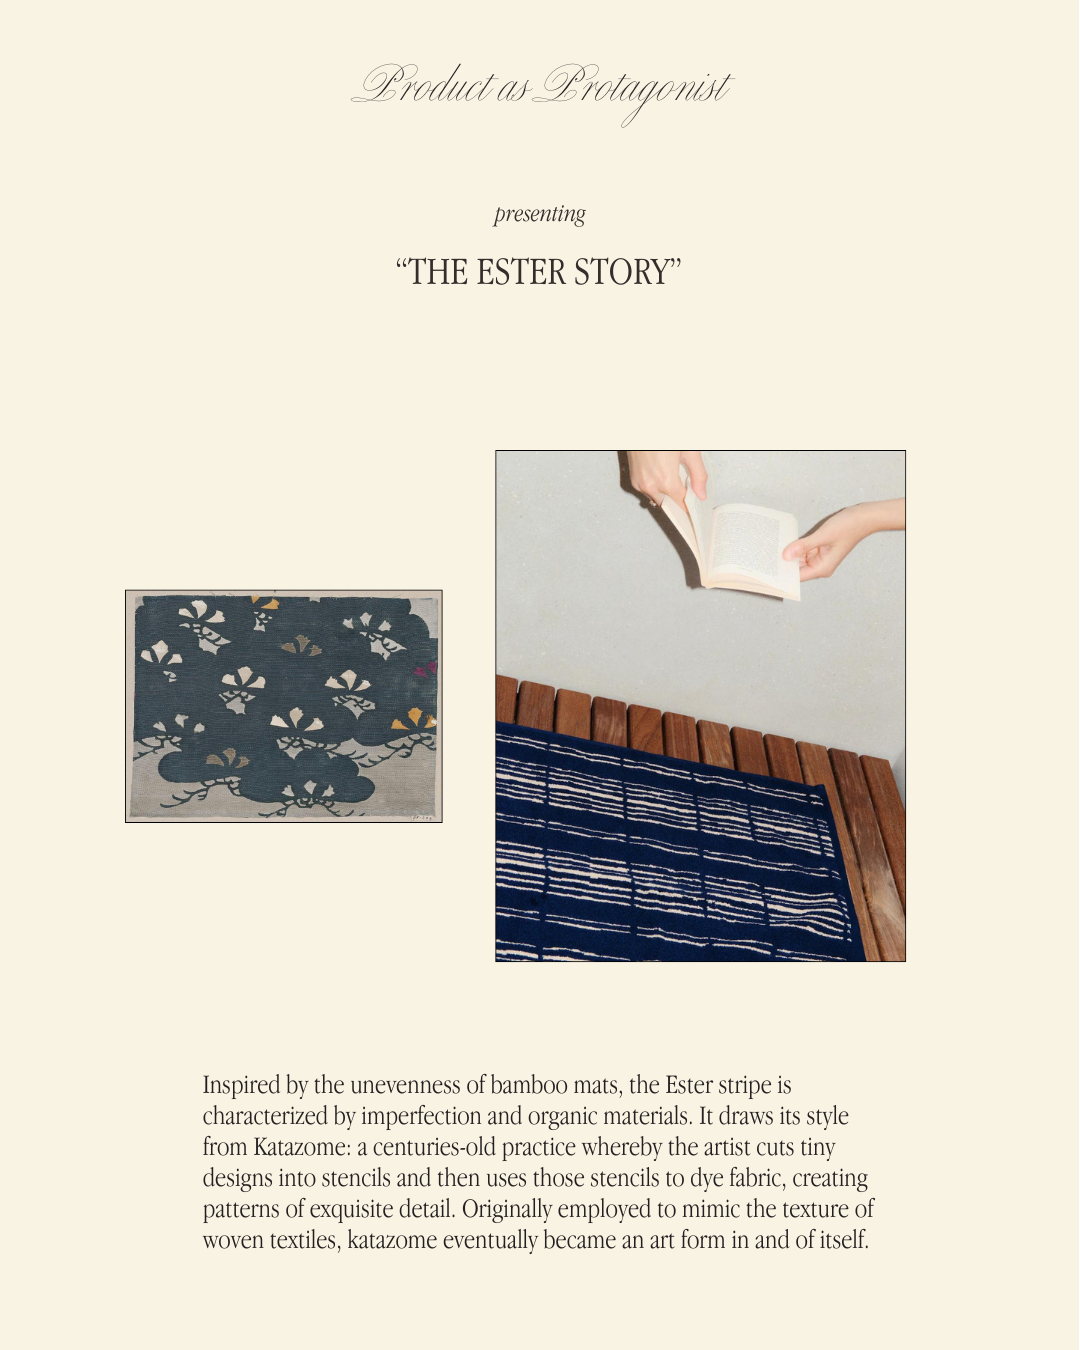 PRODUCT AS PROTAGONIST: The Ester Story